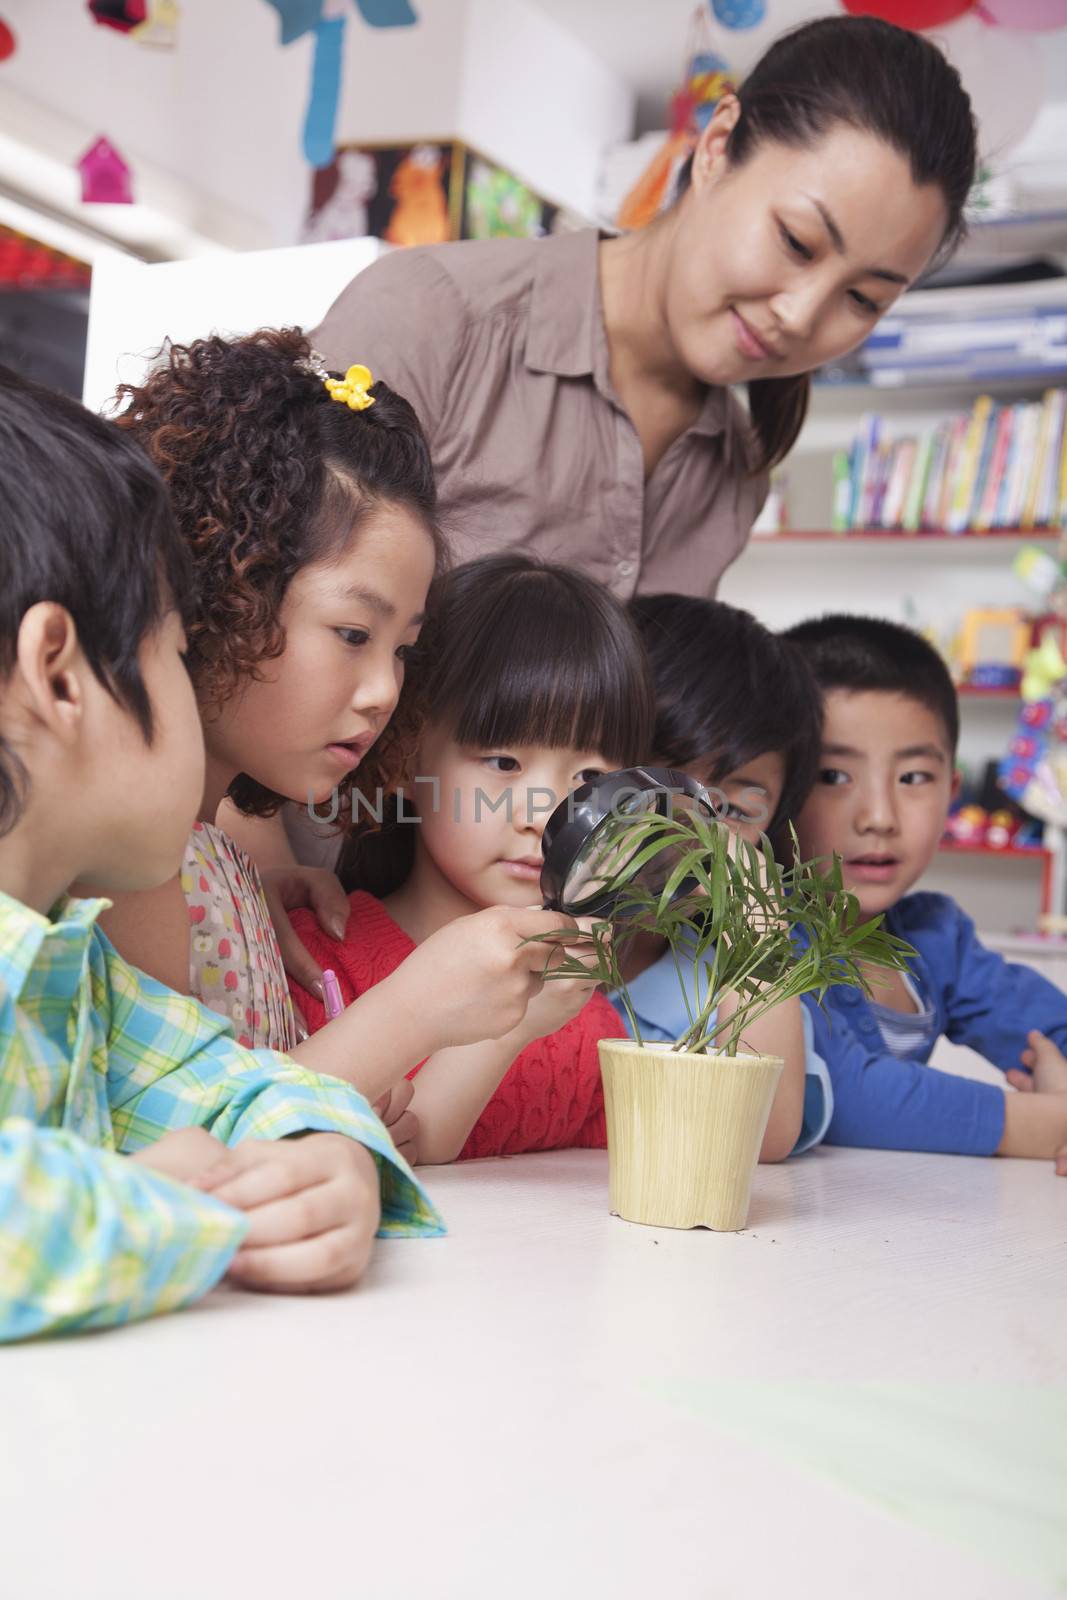 Students Looking at Plant with a Magnifying Glass